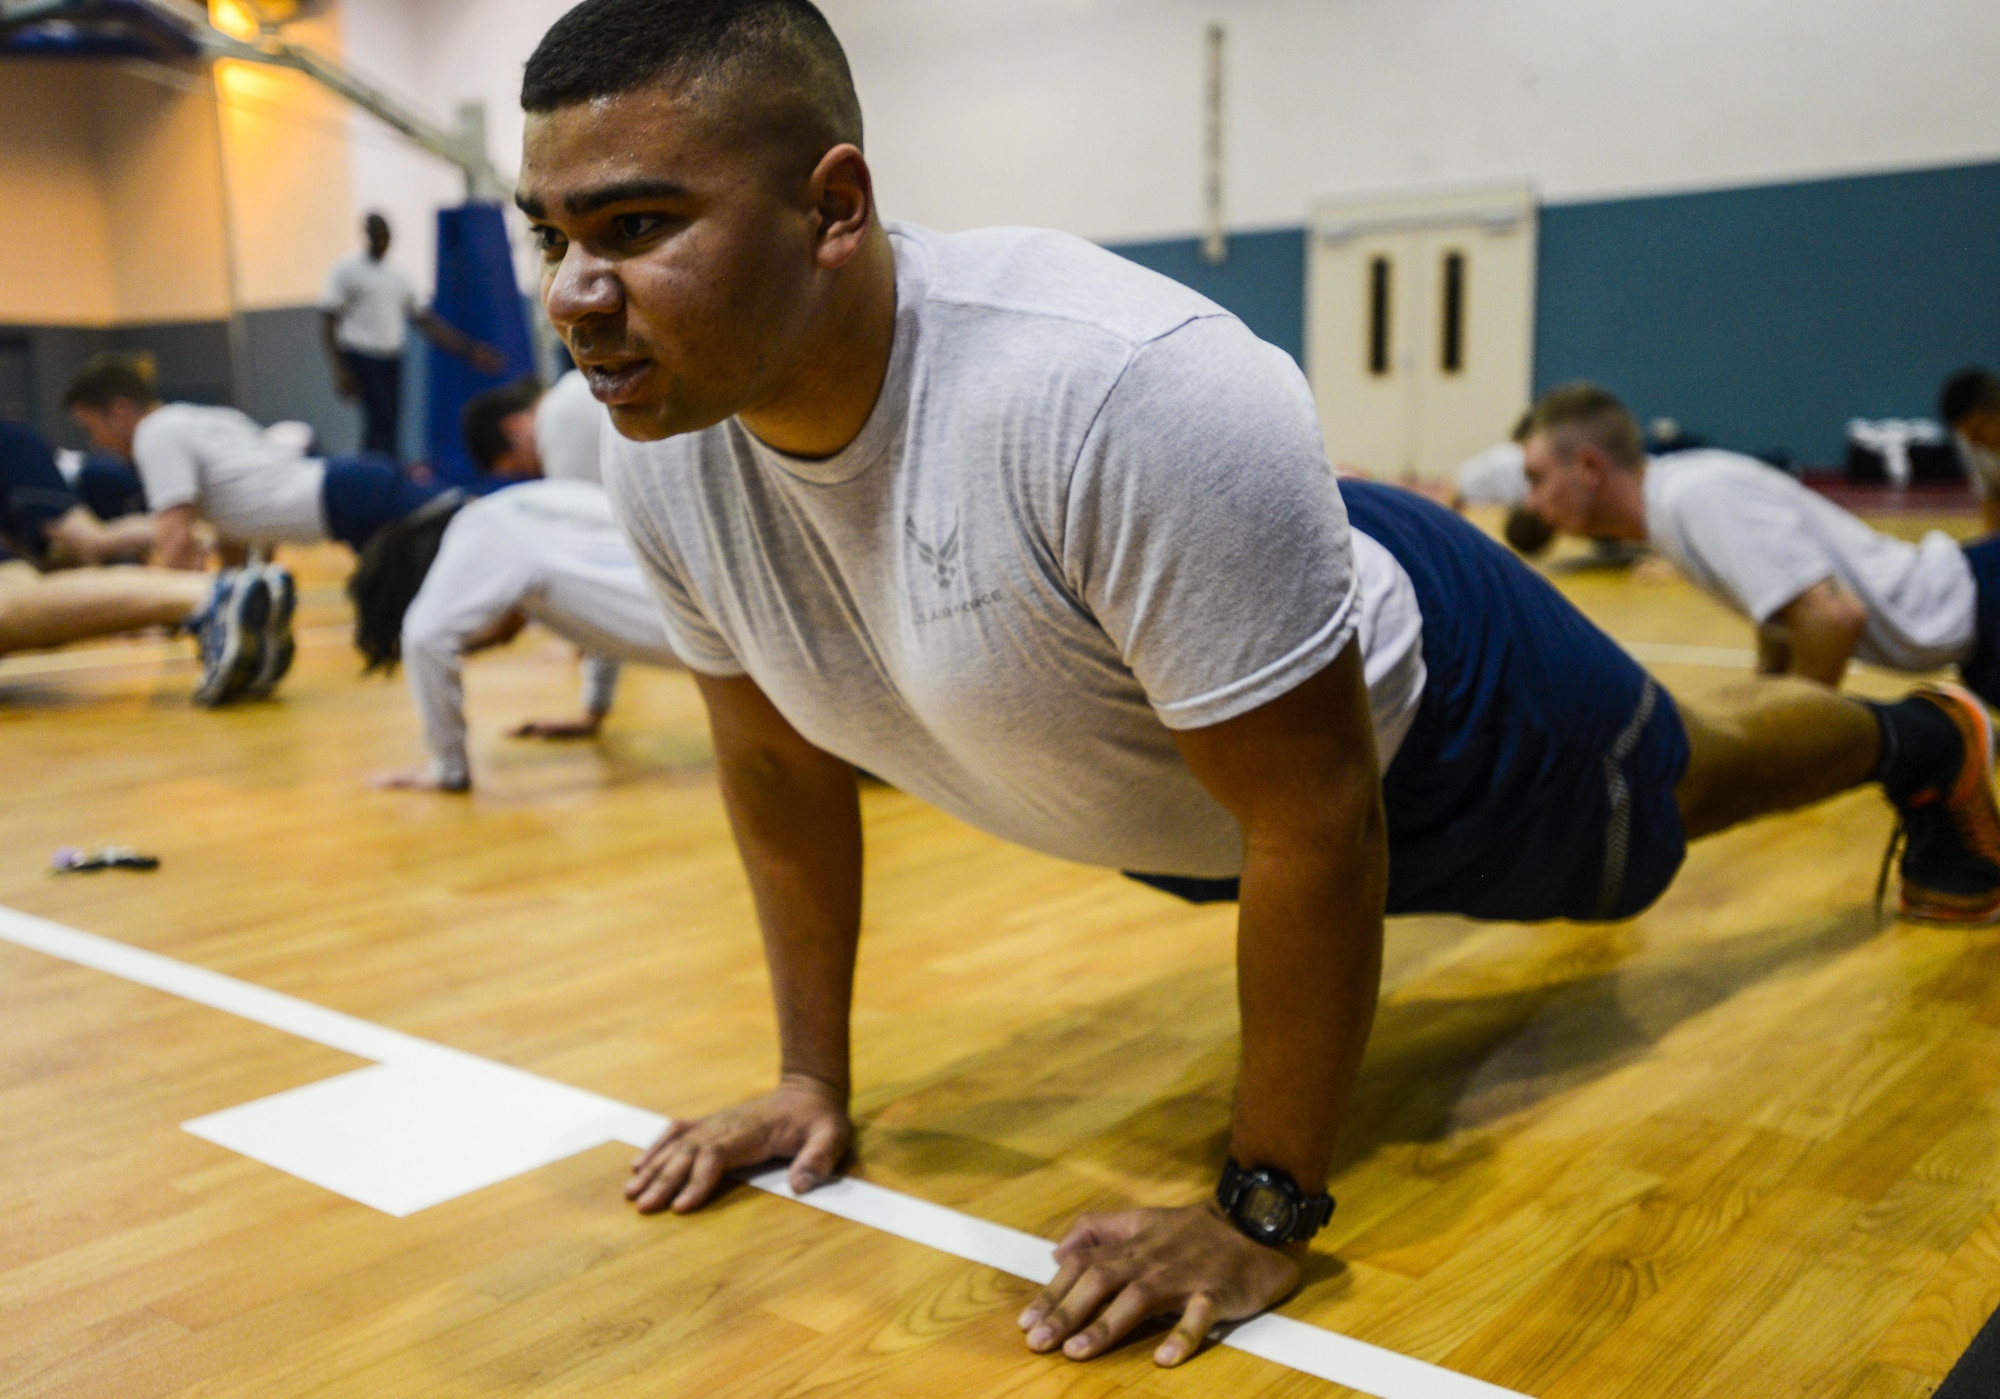 Airman 1st Class Matthew Murray, 1st Air and Space Communications Operations Squadron intelligence network infrastructure technician, performs a pushup during a unit physical training session on Ramstein Air Base, Germany, March 14, 2017. As the 1 ACOS tries to complete 435,000 pushups by June 2018, the unit counts pushups that are performed during PT sessions, physical fitness assessments, and random pushups as long as another Airmen is present to verify the number done. (U.S. Air Force photo/Staff Sgt. Timothy Moore)